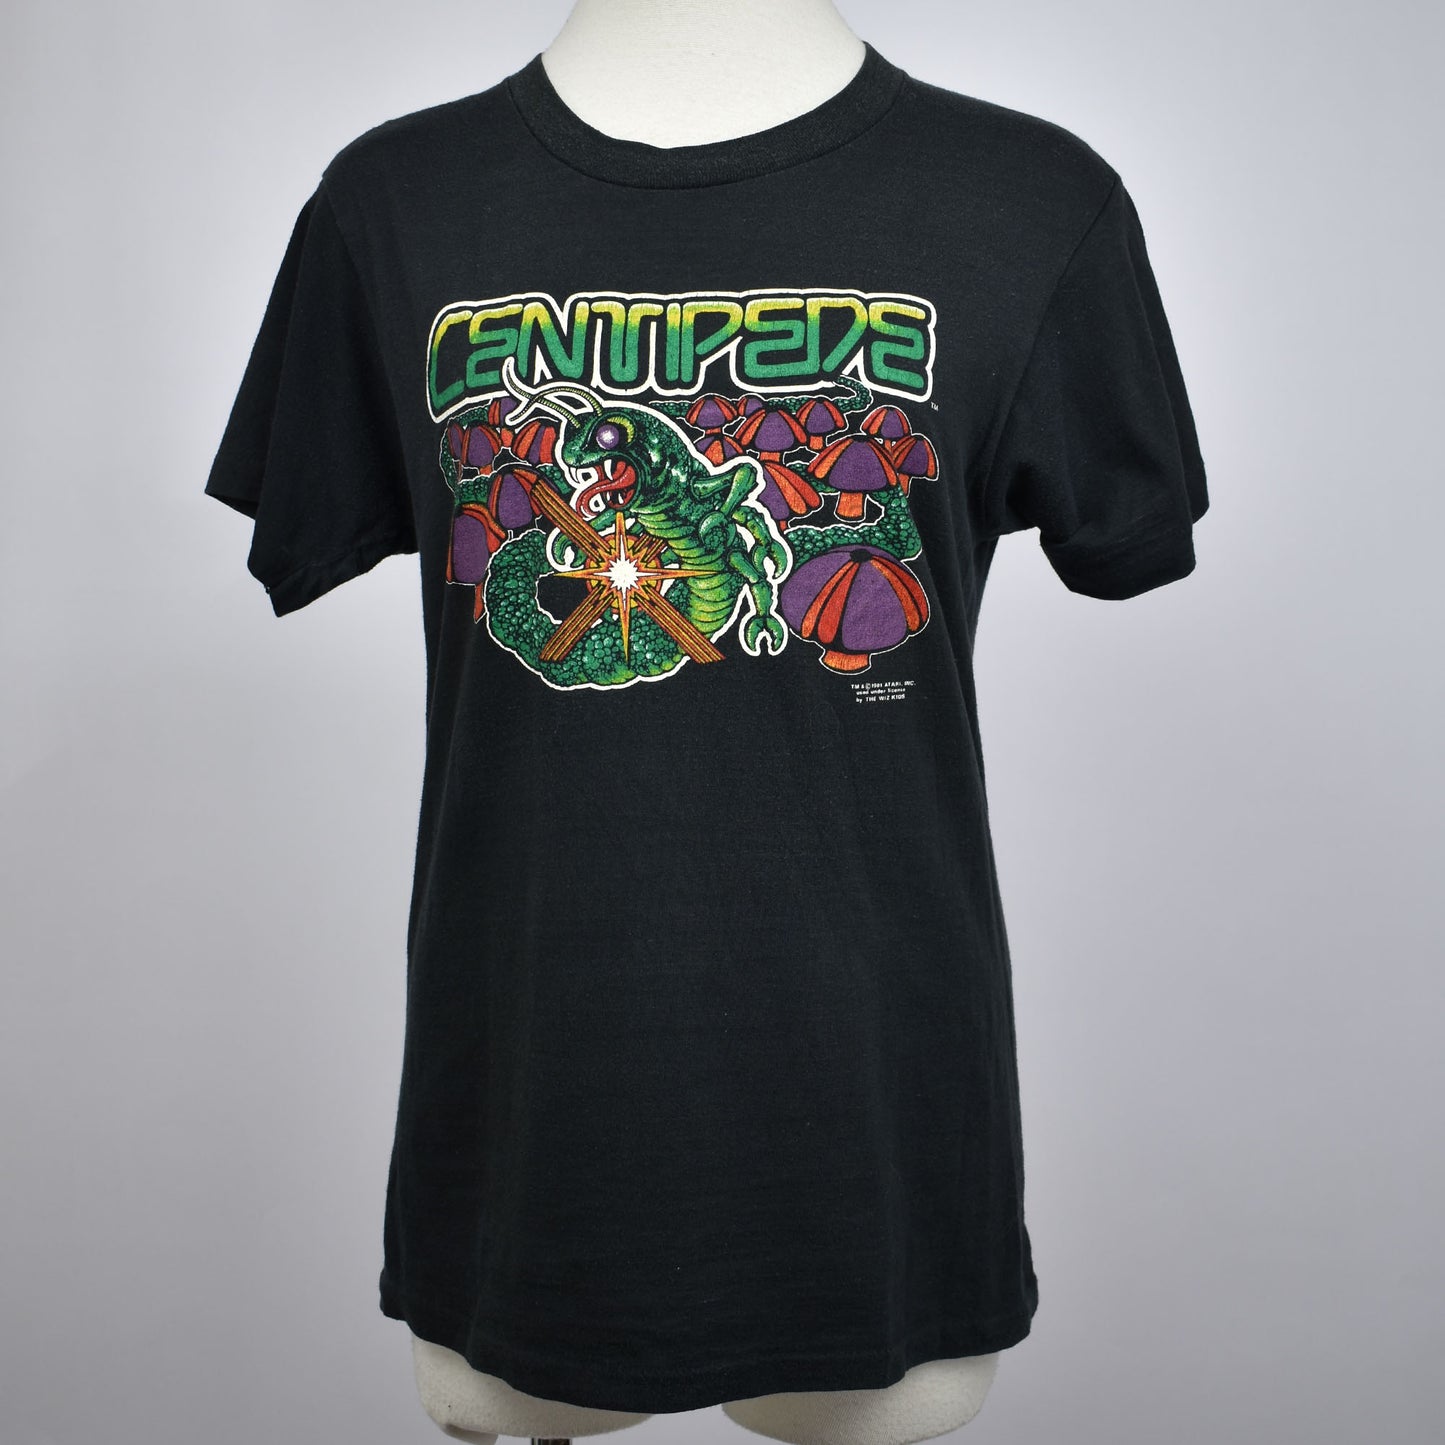 Vintage 1981 Centipede Video Game Tee Atari Inc. Made in USA Size M T-shirt